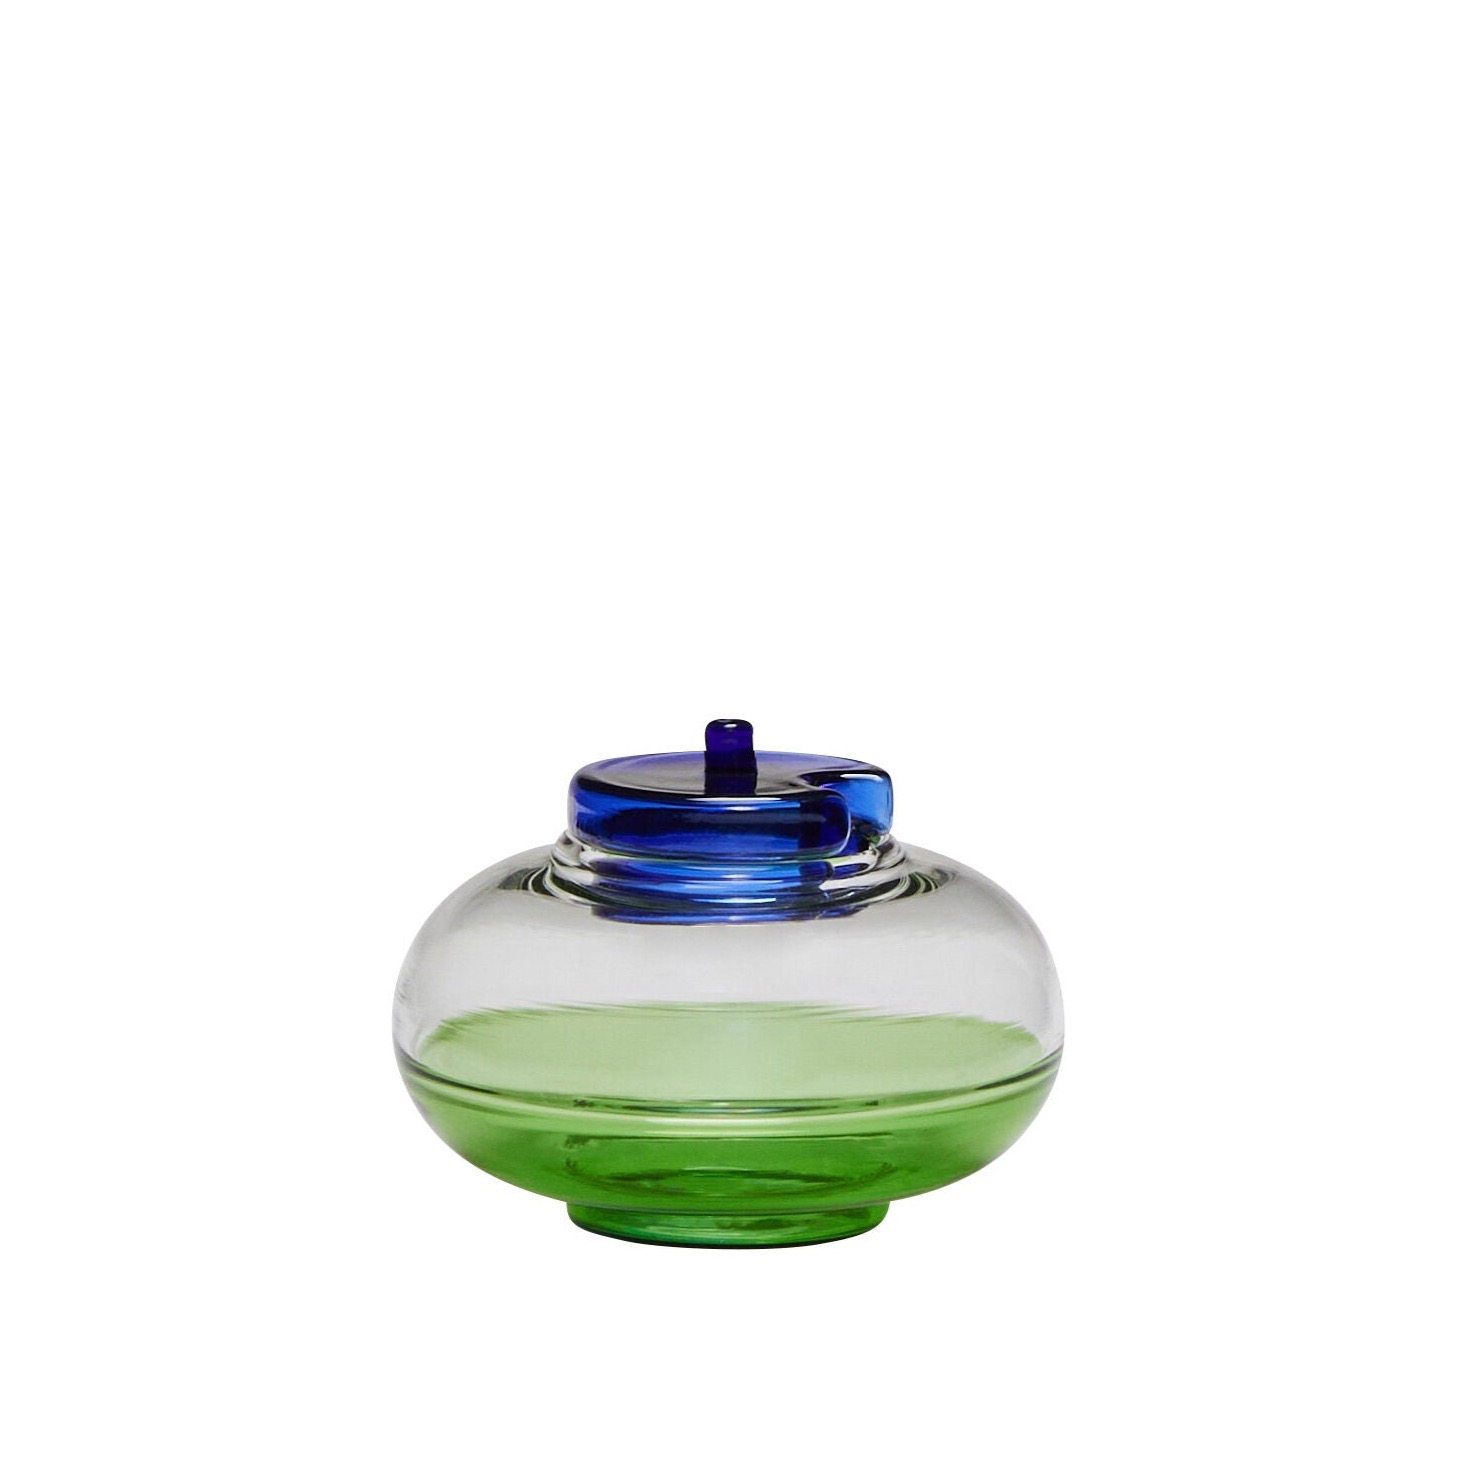 Hubsch NoRush Sugar Bowl in Blue, Clear, and Green